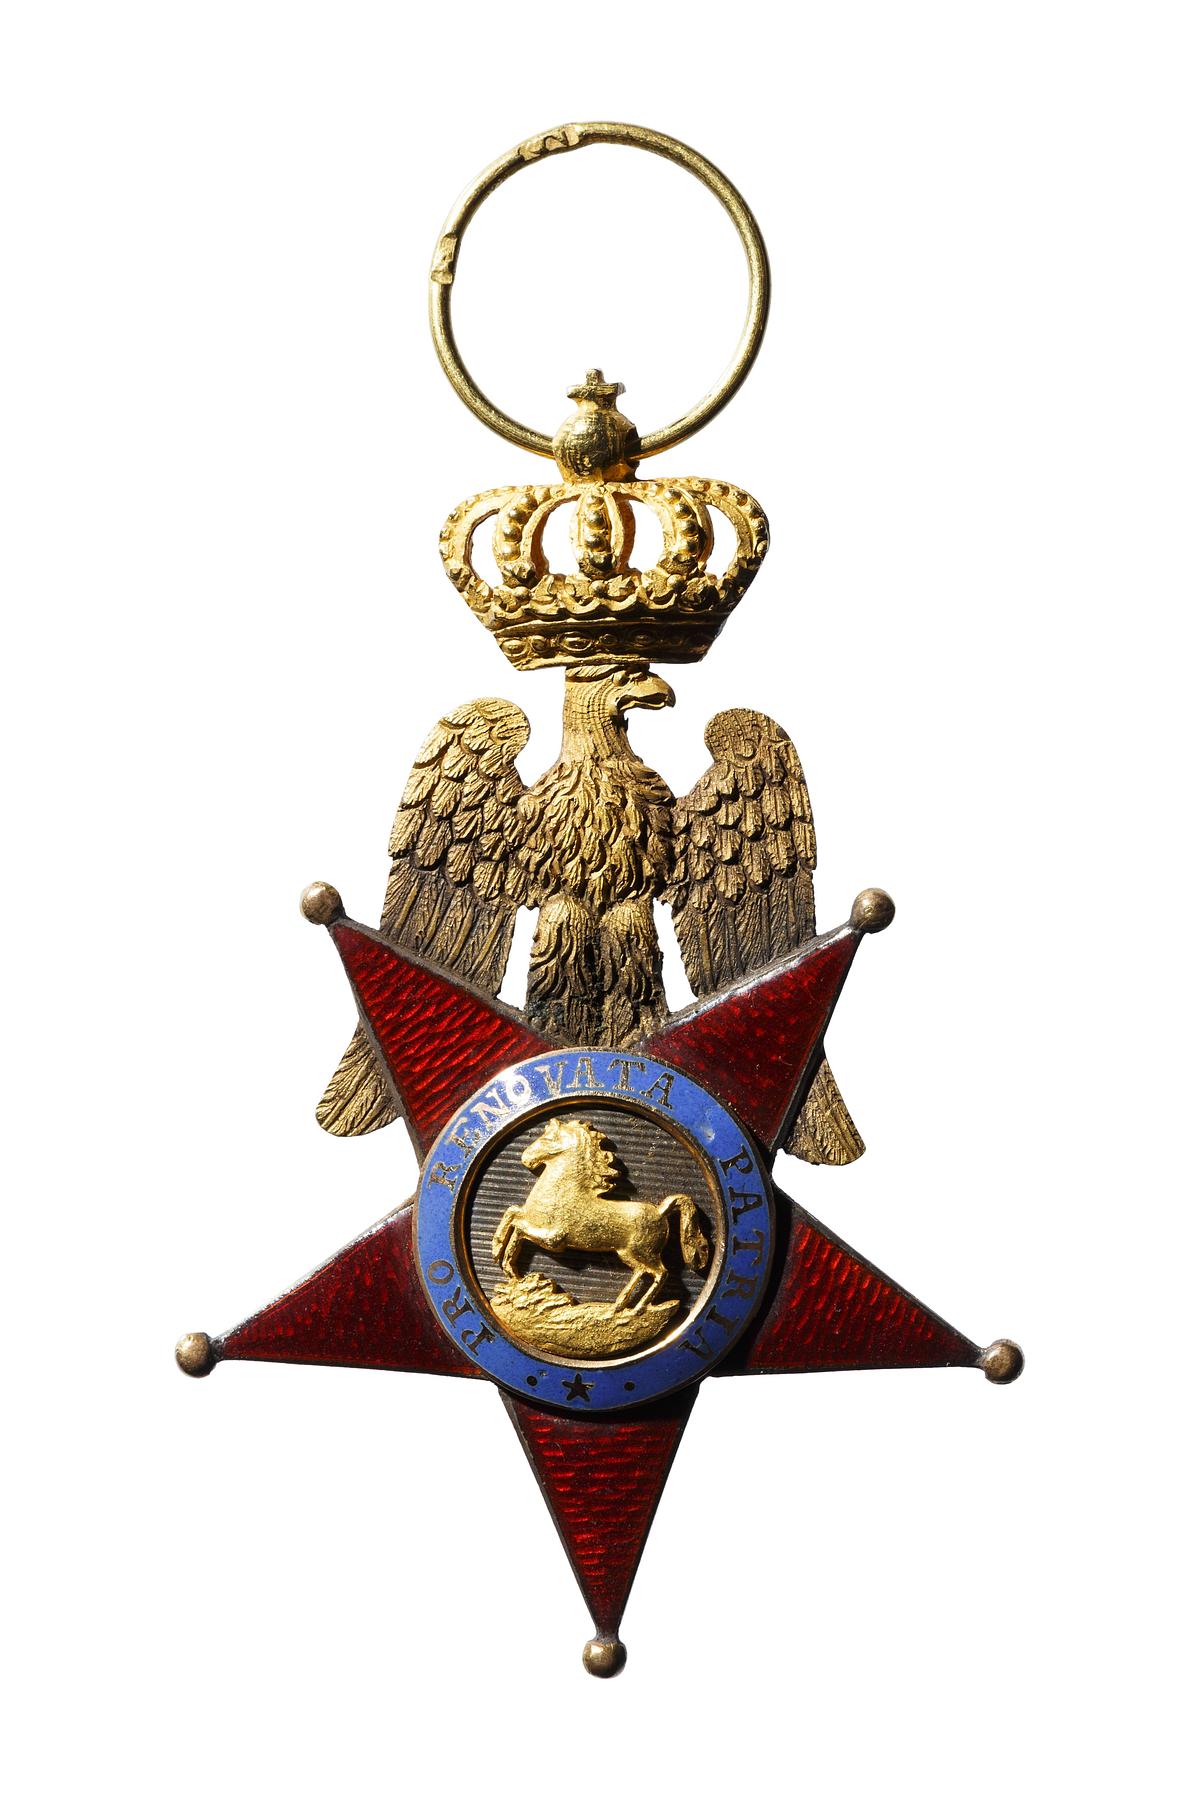 The Royal Order of the Two-Sicilies (Ordine reale delle Due Sicilie), N24